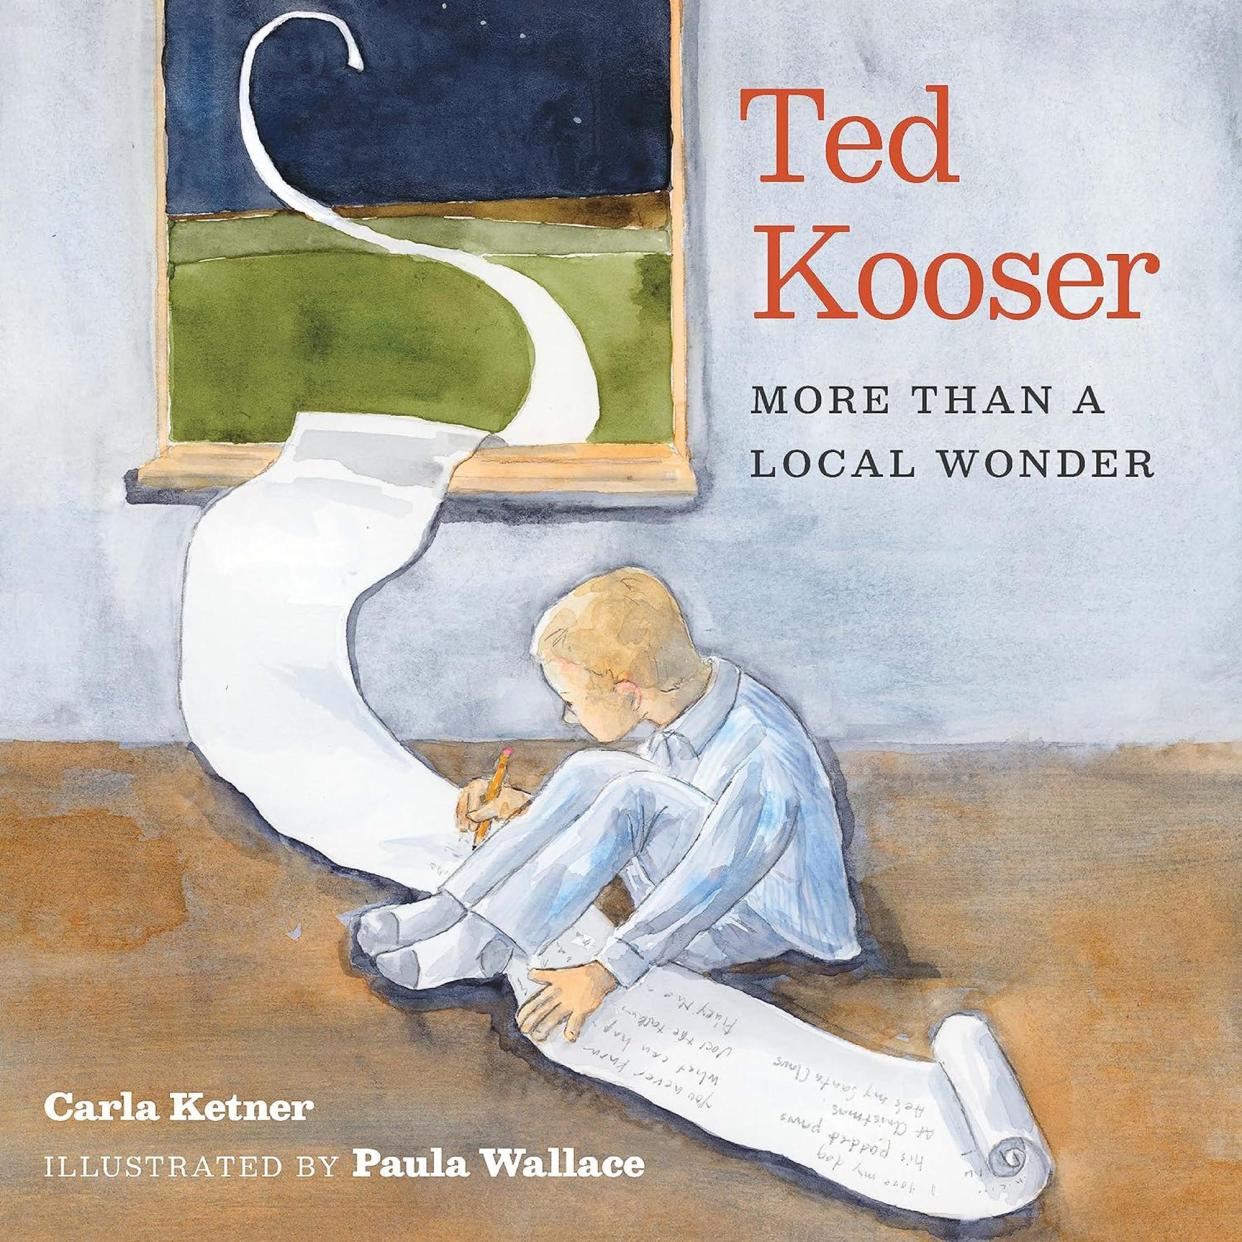 "Ted Kooser: More Than a Local Wonder" is a new children's book written by Carla Ketner and illustrated by Paula Wallace.